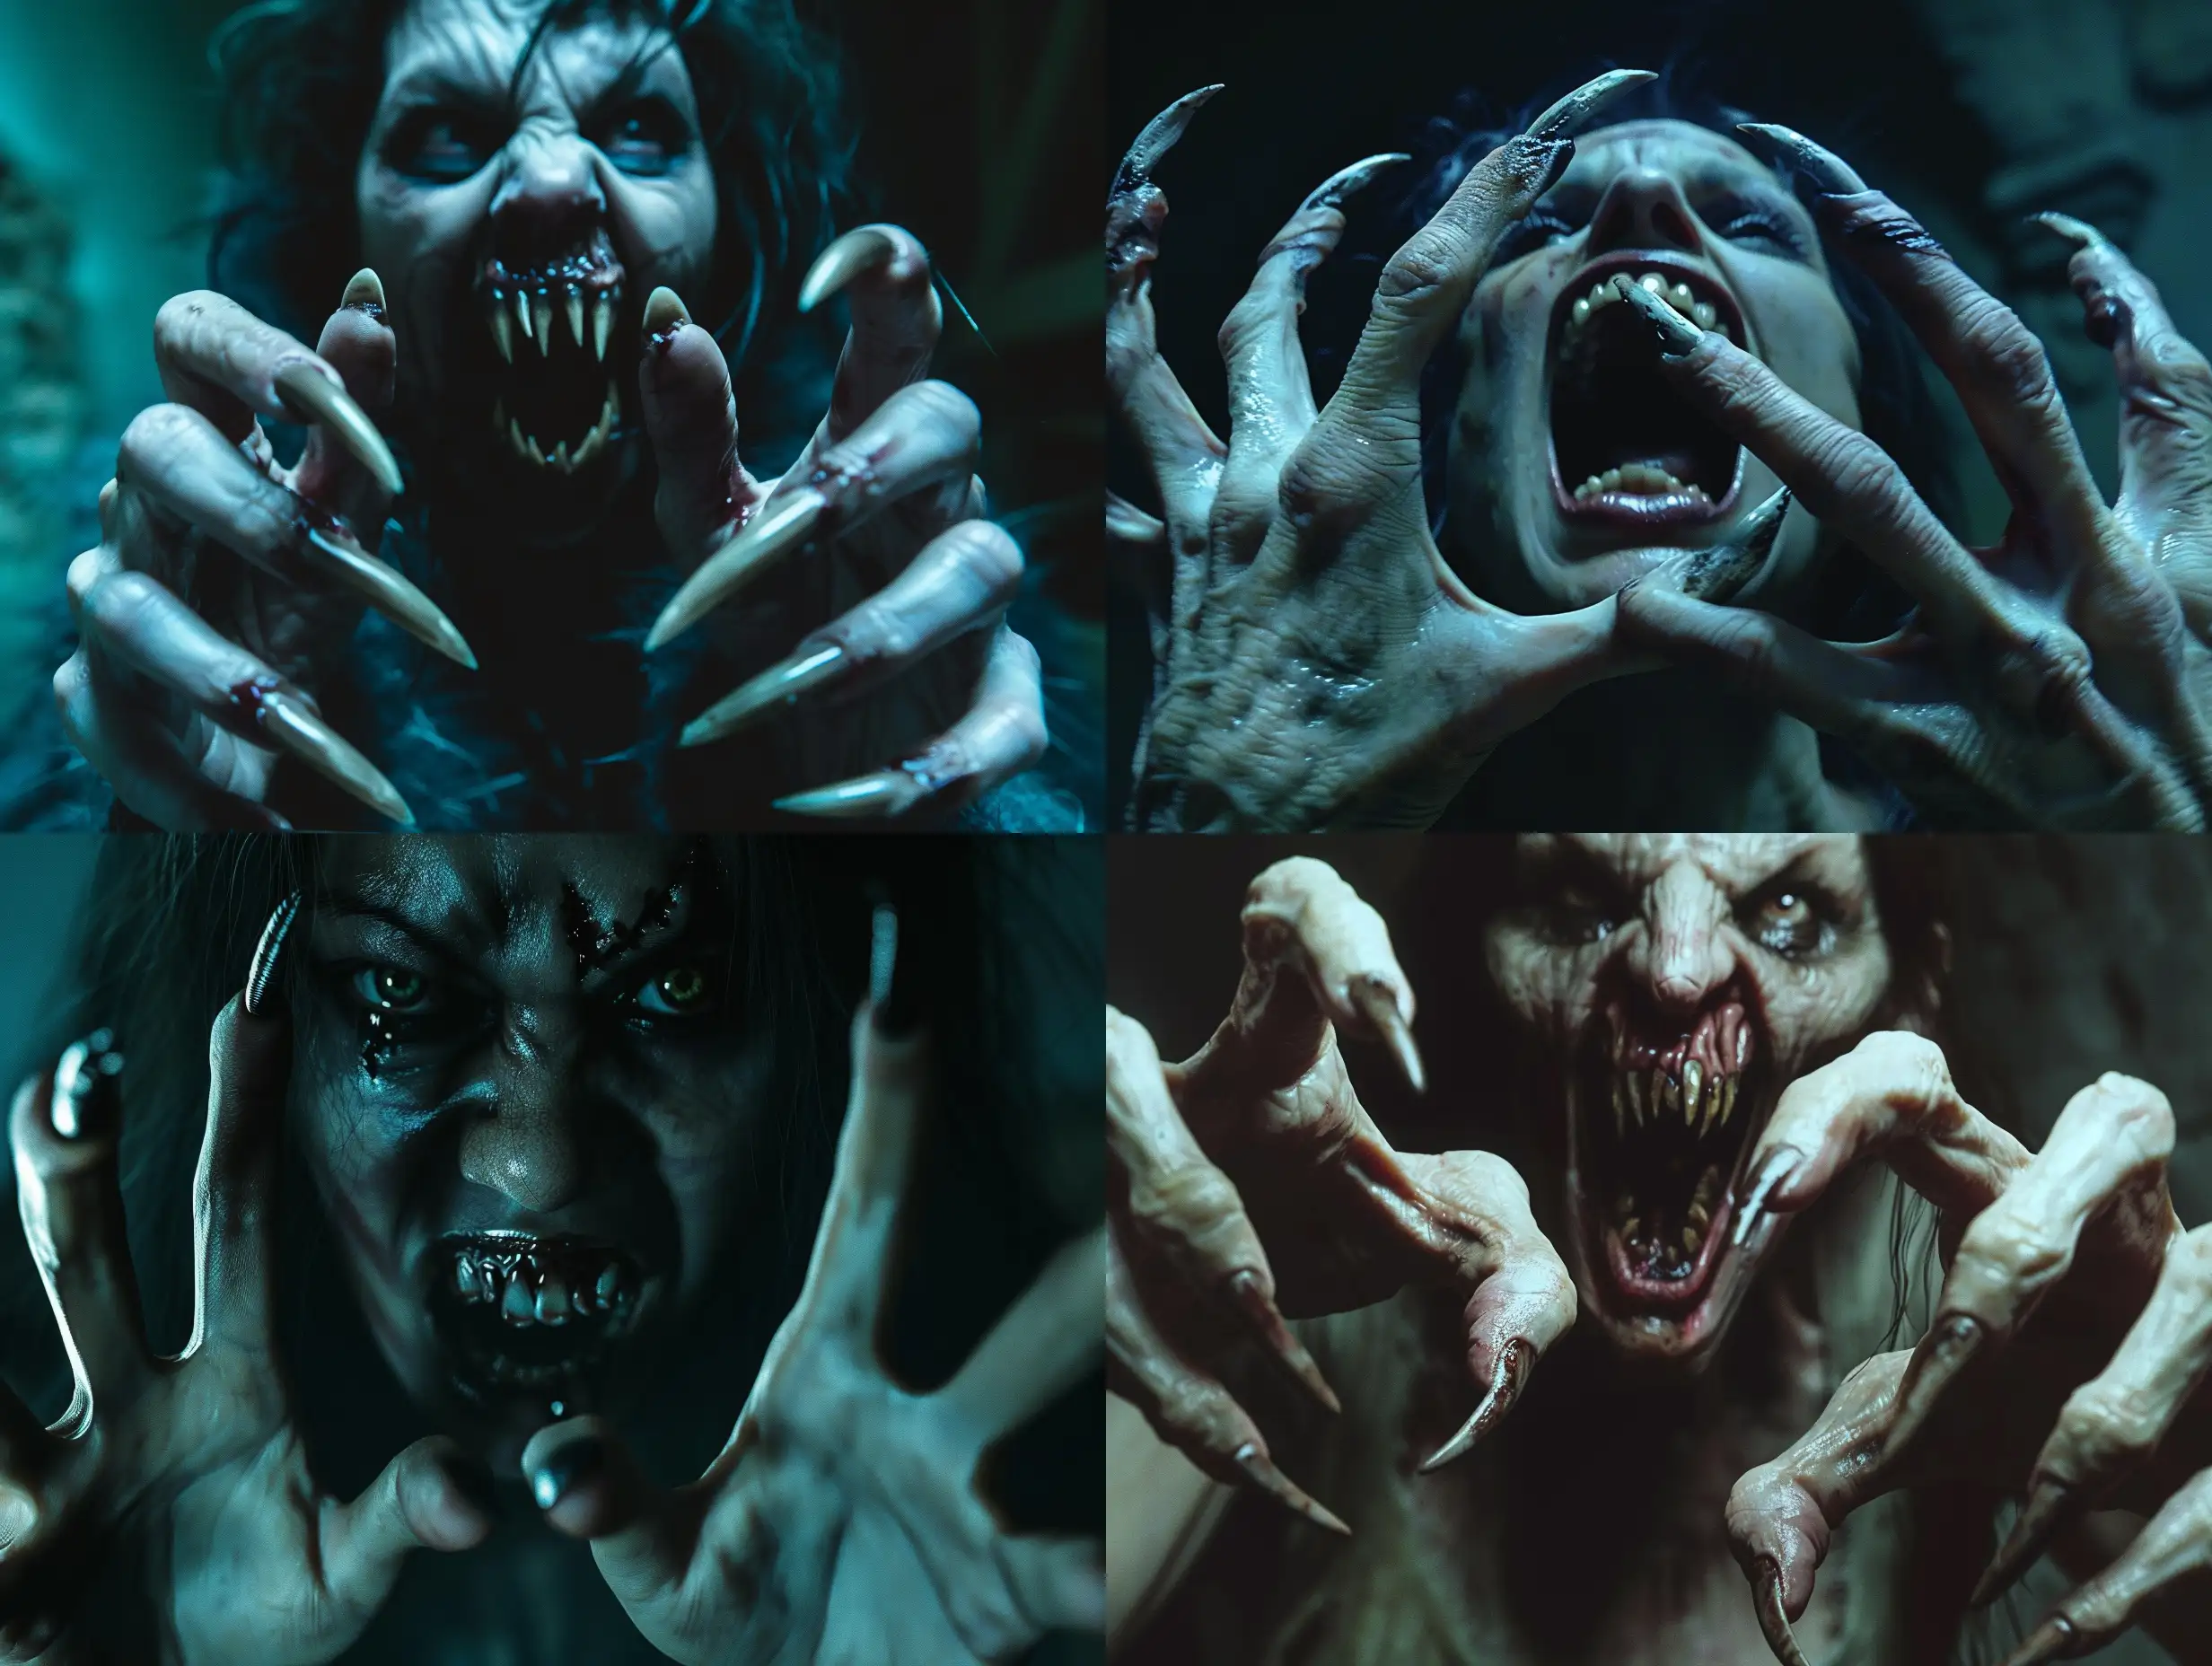 A photorealistic scene of a wild ugly monstruos undead  vampire female with extra long pointed fingernails, on each hands with five fingers, her mouth is threateningly open, and terrible teeth look like fangs, the vampire looks like she climbed out of the grave, her nails resemble the claws of a predators.scene inside darkness room,hyper-realism, cinematic, high detail, photo detailing, high quality, photorealistic, aggressive, dark atmosphere, realistic, the smallest details, detailed nails, horror, atmospheric lighting, full anatomical, photorealism, detailed, textured, dark, haunting, night-time scene, intense, creepy, undead, spooky, eerie, atmospheric lighting, nightmare, grotesque, terrifying, realistic anatomy, human hands, very clear without flaws with five fingers.